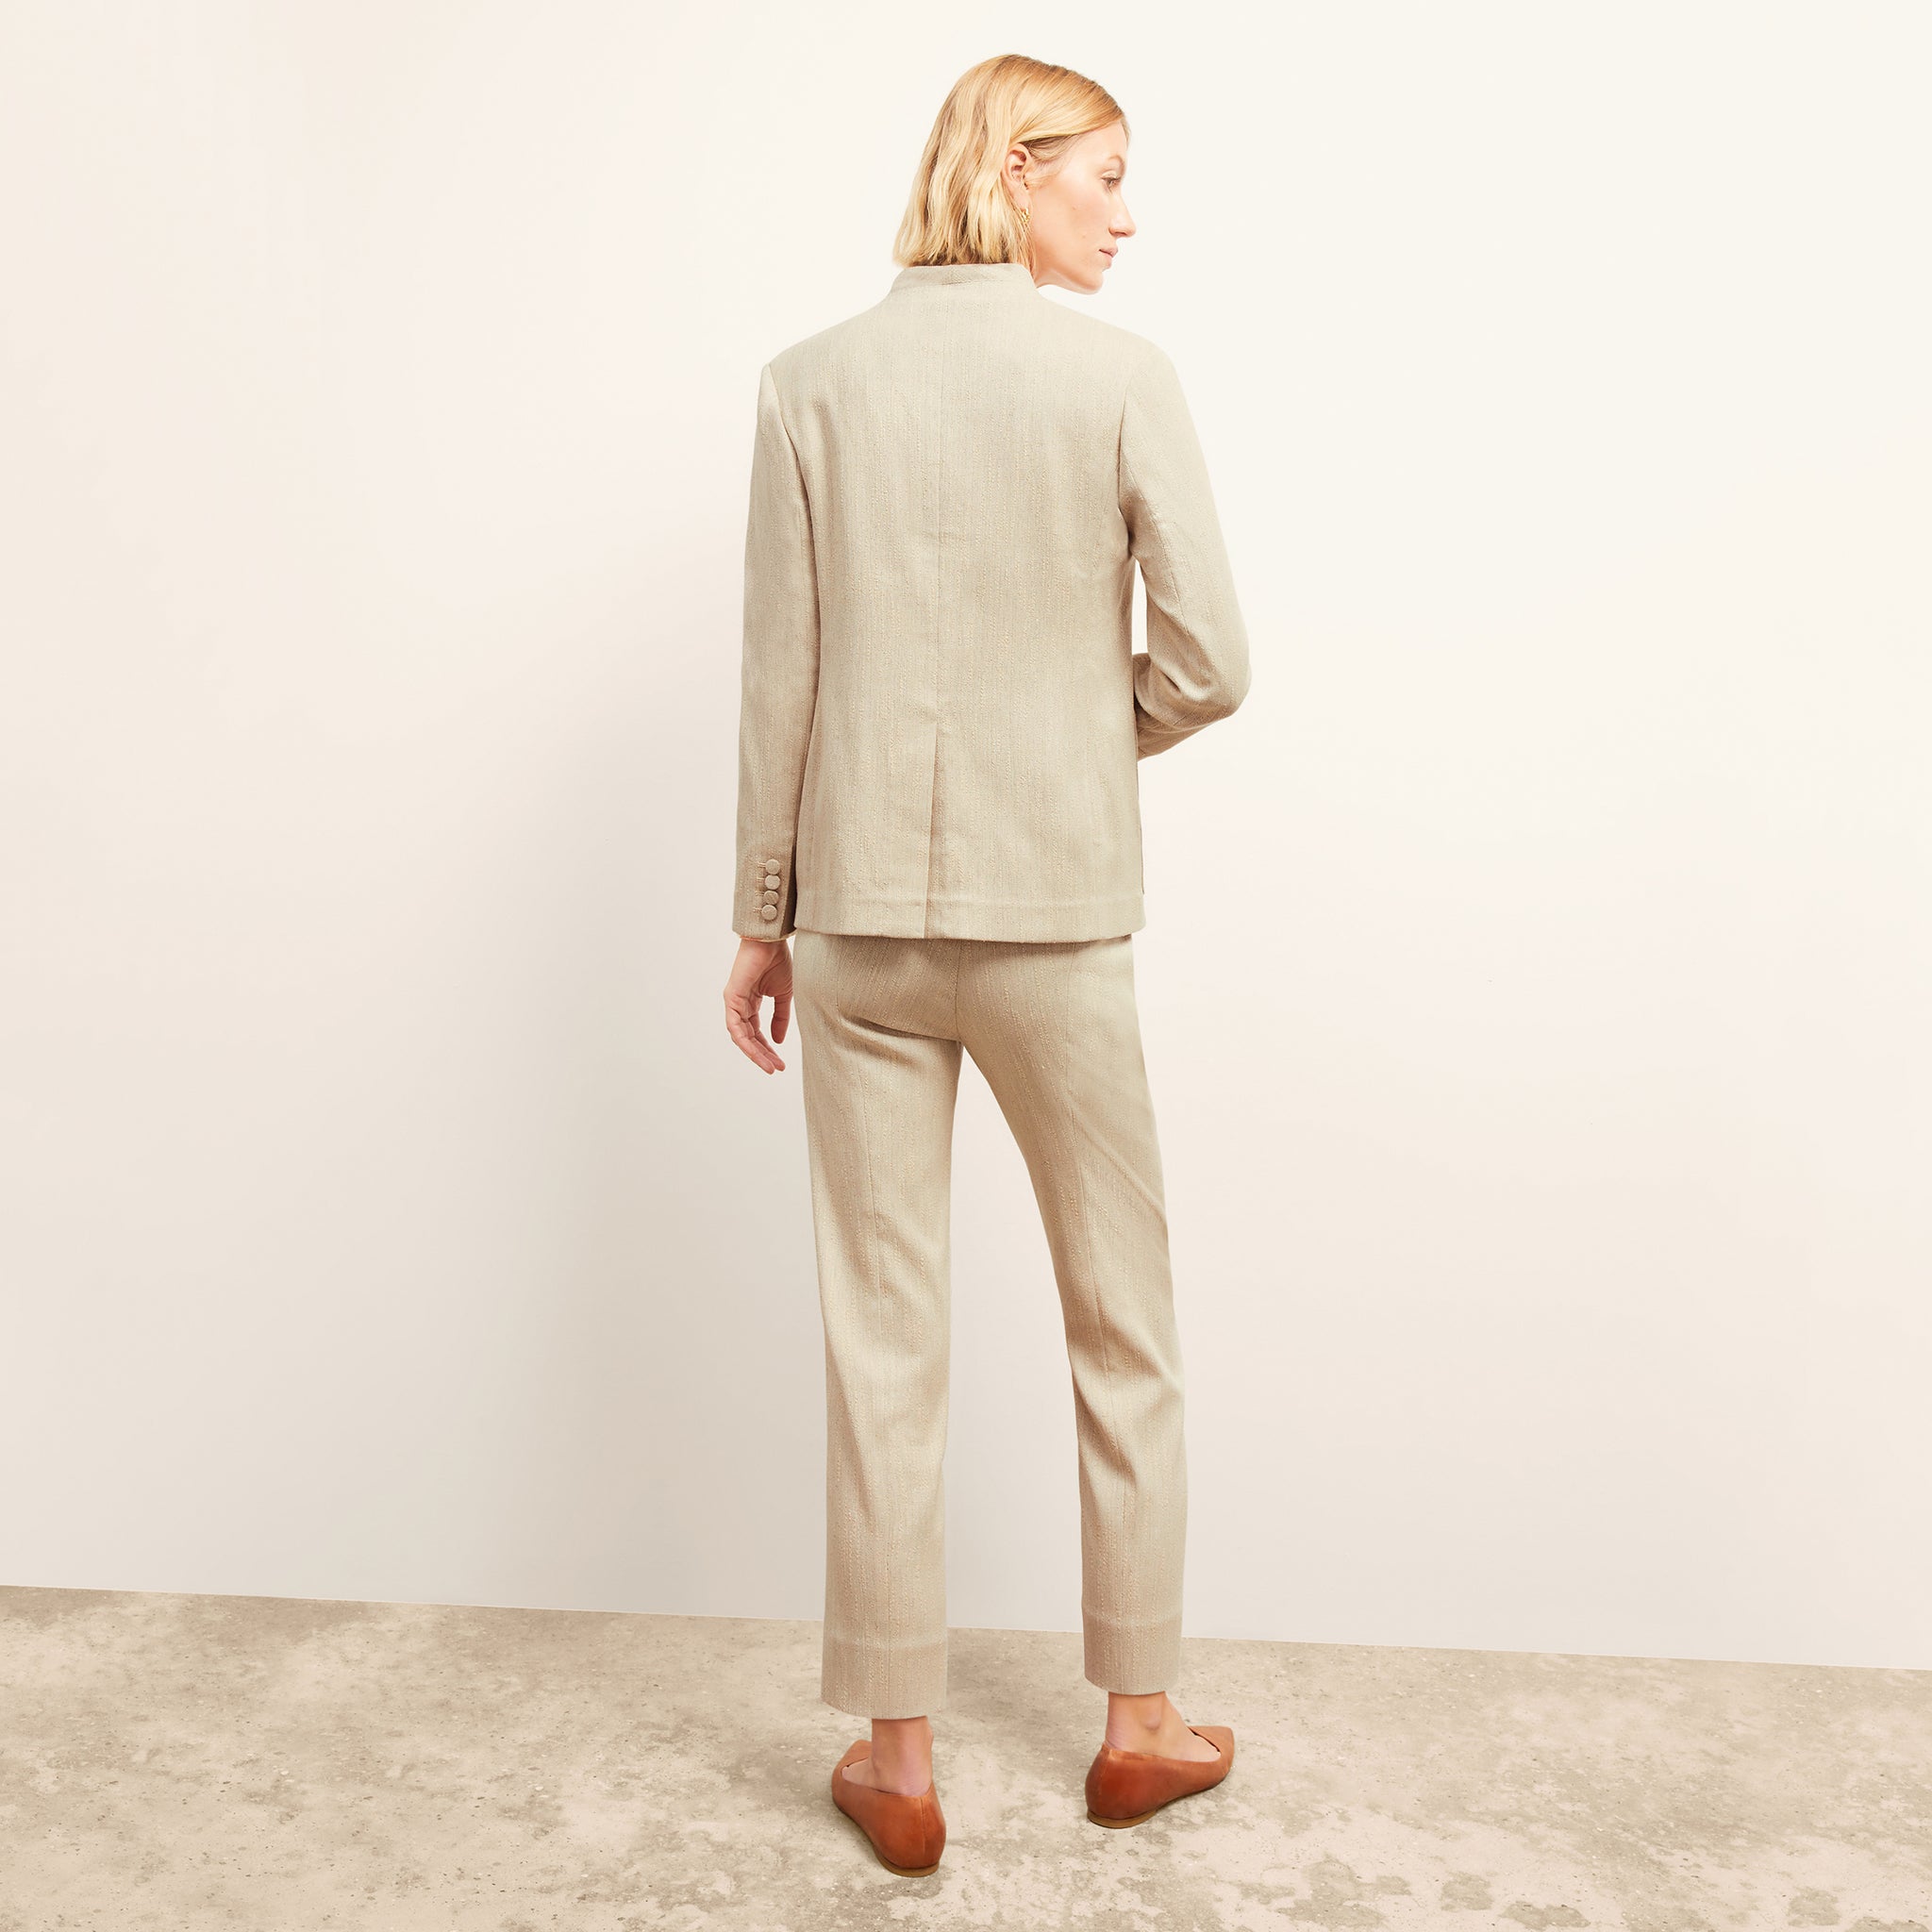 Back image of a woman wearing the Janette Jacket in ivory